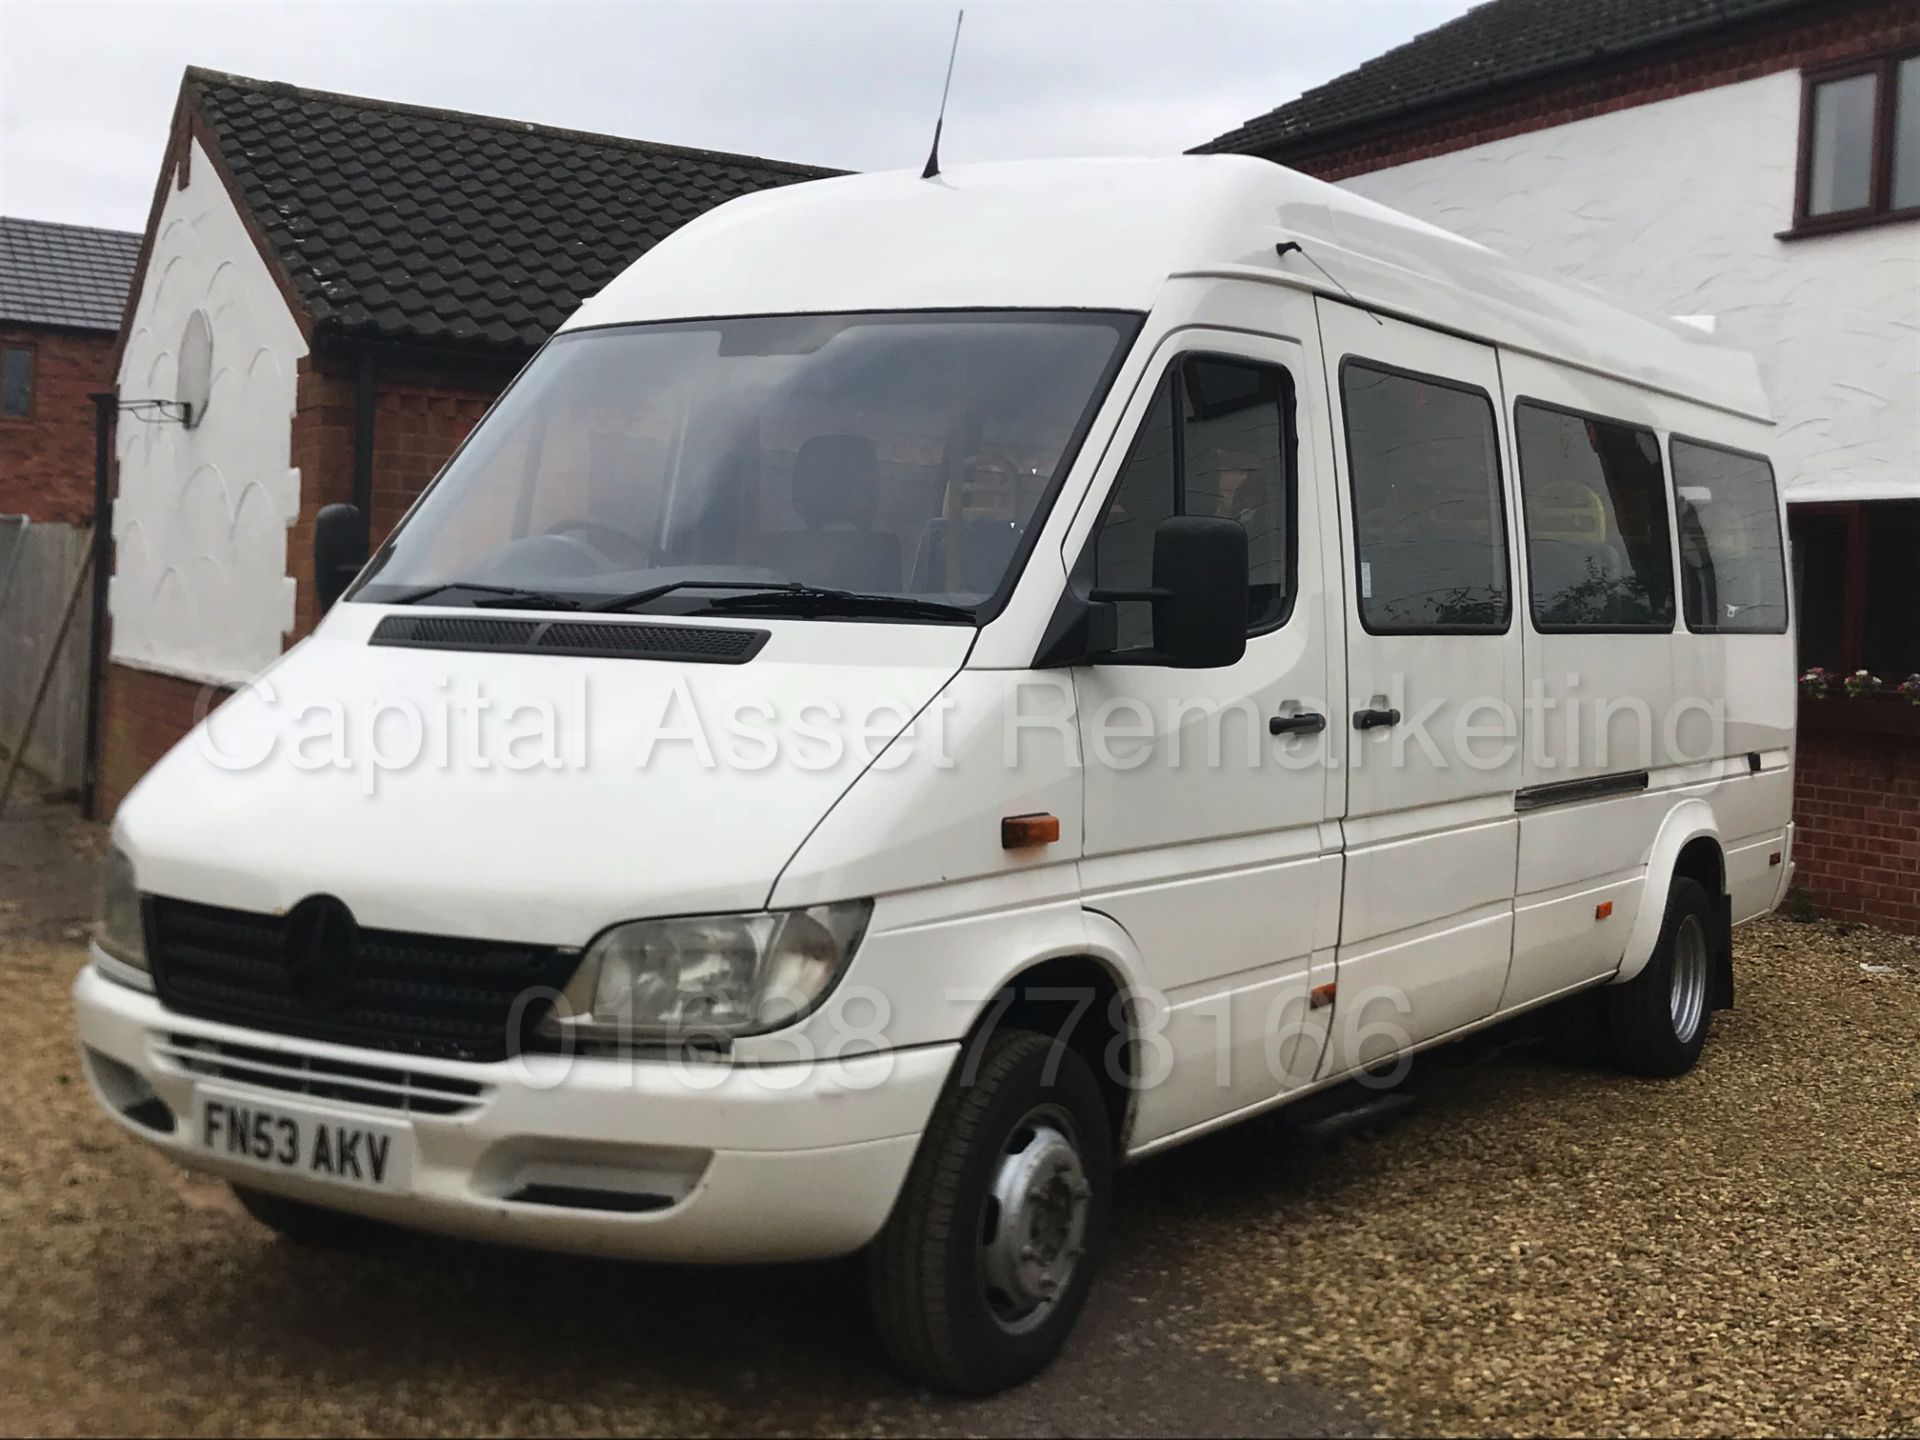 (ON SALE) MERCEDES-BENZ 411 CDI 'LWB - 16 SEATER MINI-BUS' (2004 MODEL) 'COACH INTERIOR' WHEEL CHAIR - Image 2 of 25